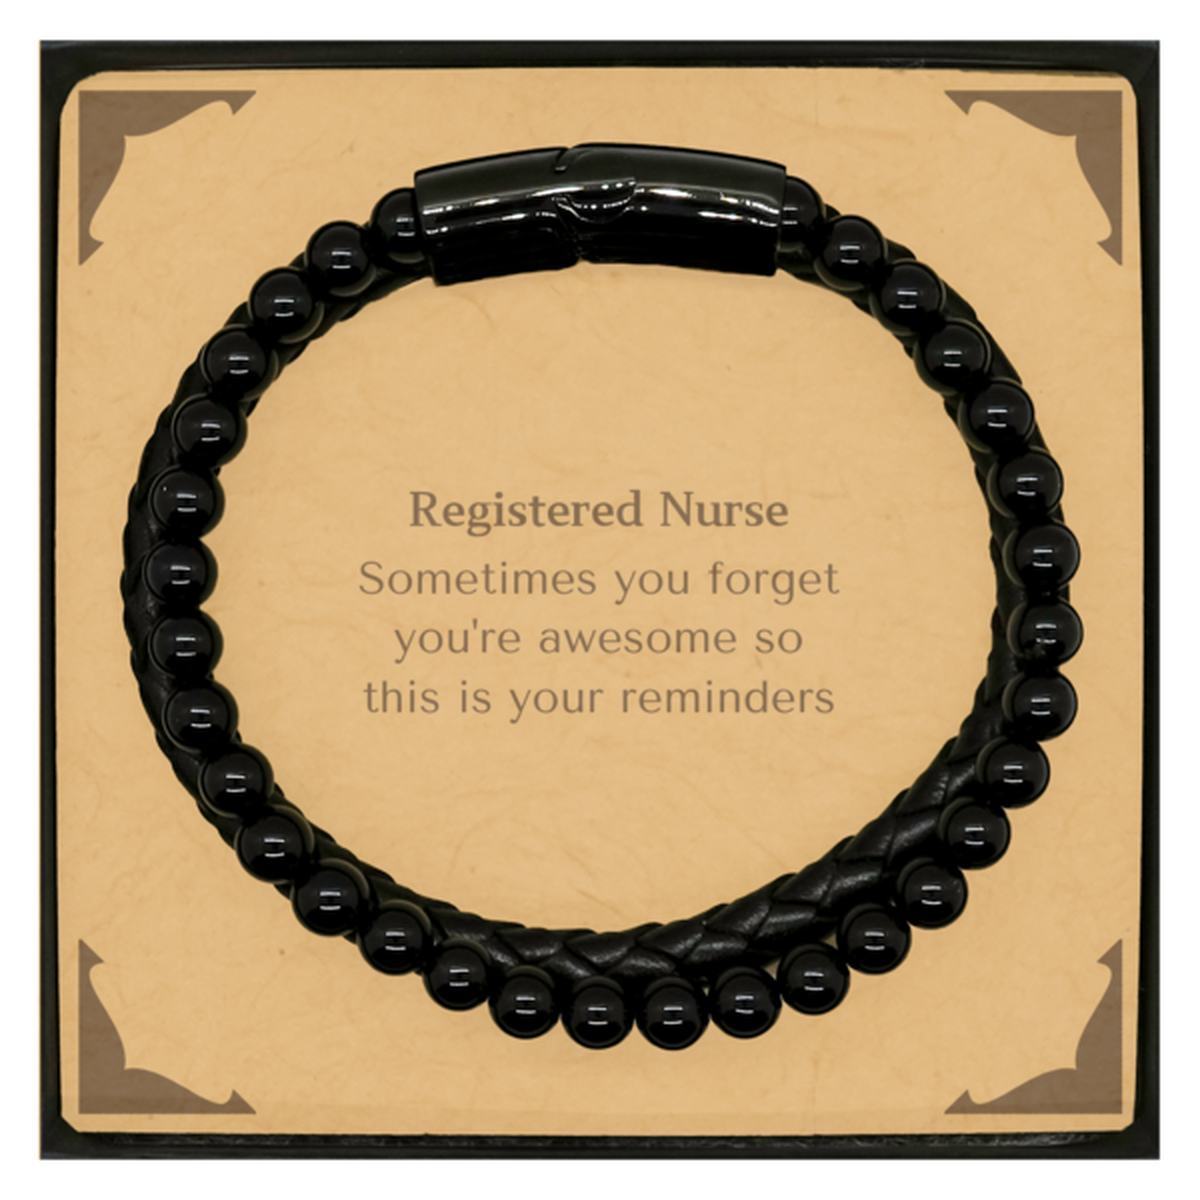 Sentimental Registered Nurse Stone Leather Bracelets, Registered Nurse Sometimes you forget you're awesome so this is your reminders, Graduation Christmas Birthday Gifts for Registered Nurse, Men, Women, Coworkers